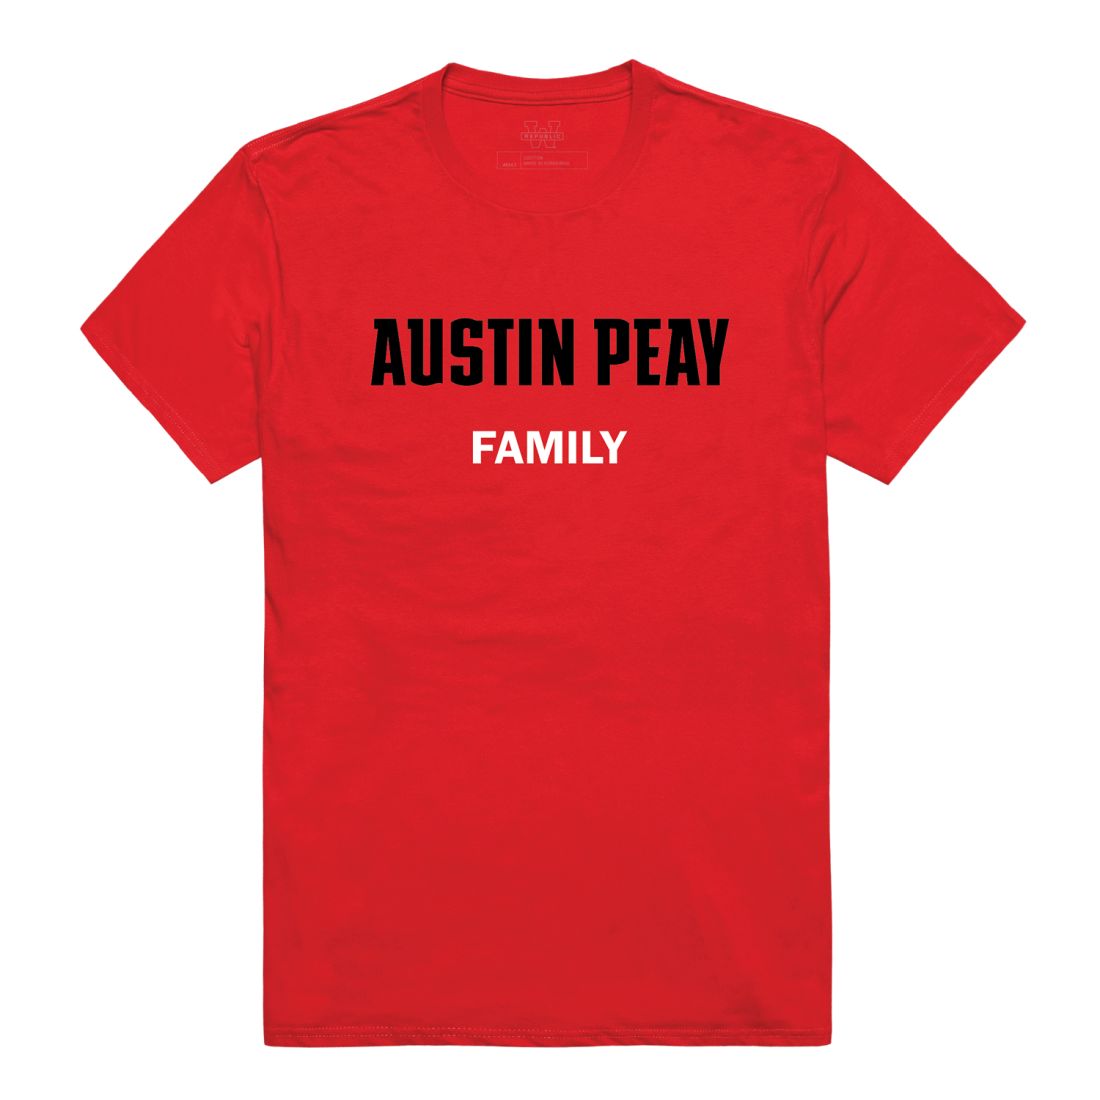 APSU Austin Peay State University Governors Family T-Shirt